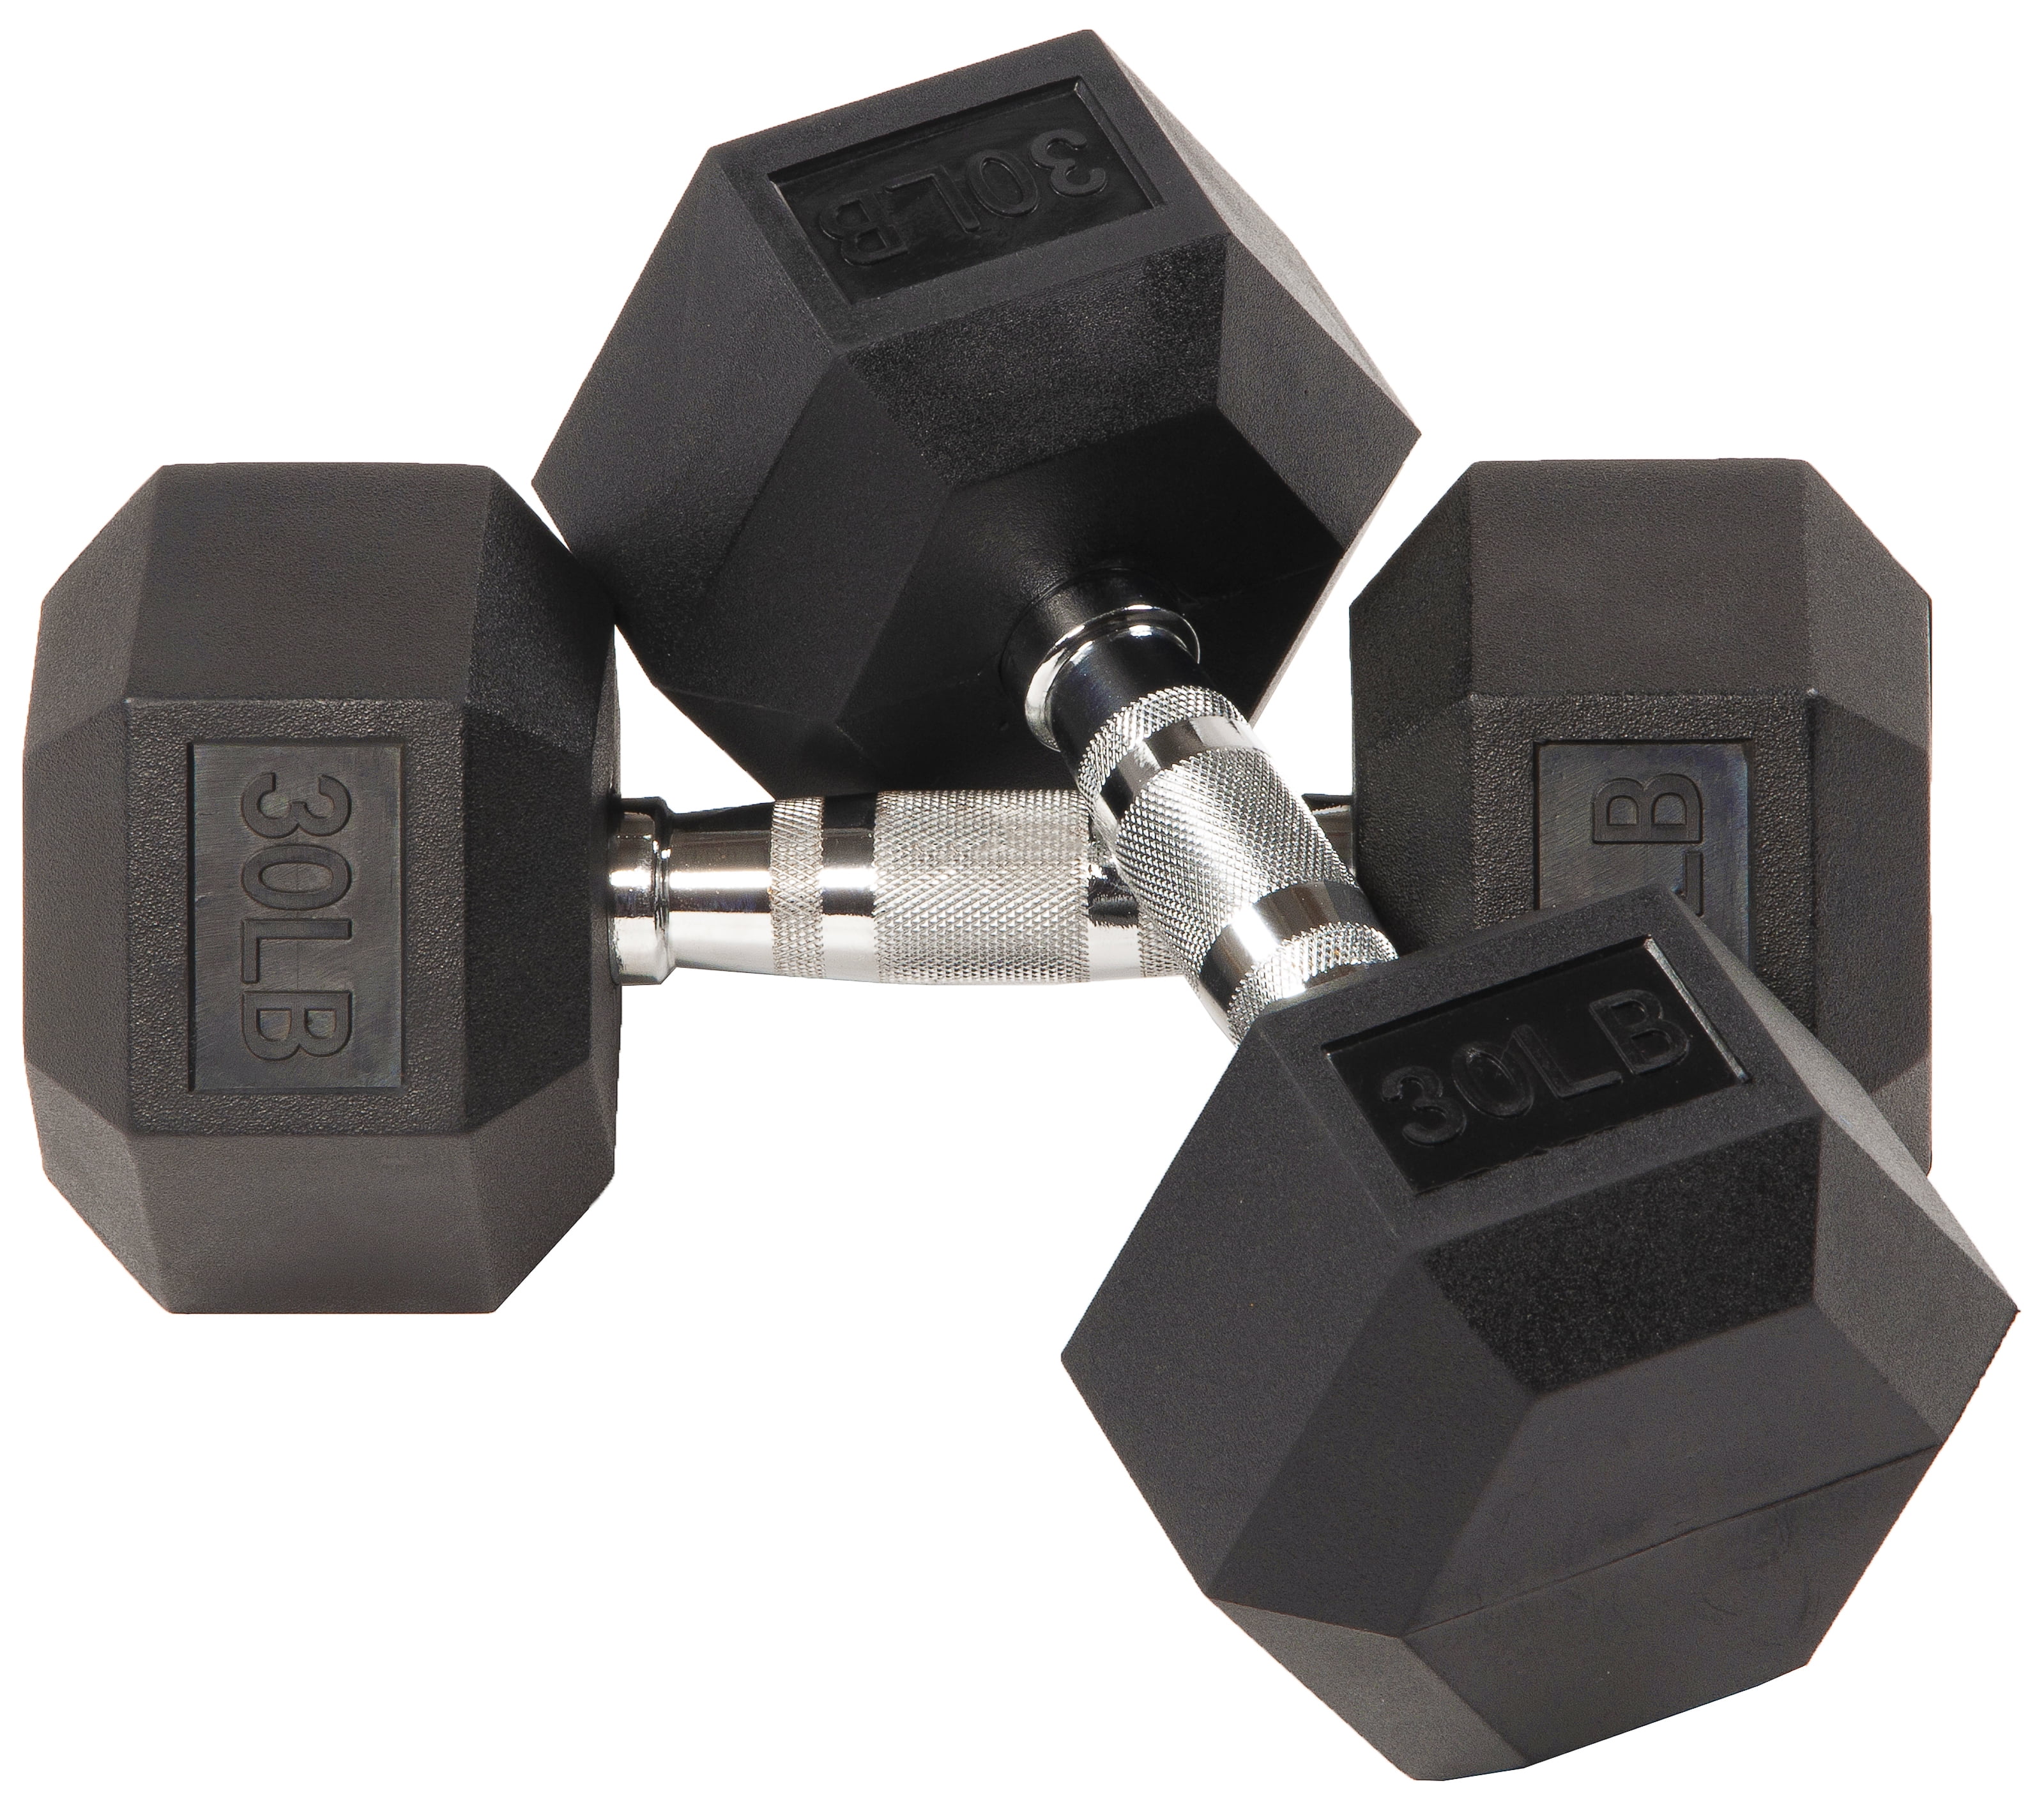 30 Pounds Total SHIPS FREE!! New HEX Rubber Dumbbells Pair Of 5 And 10 Pounds 